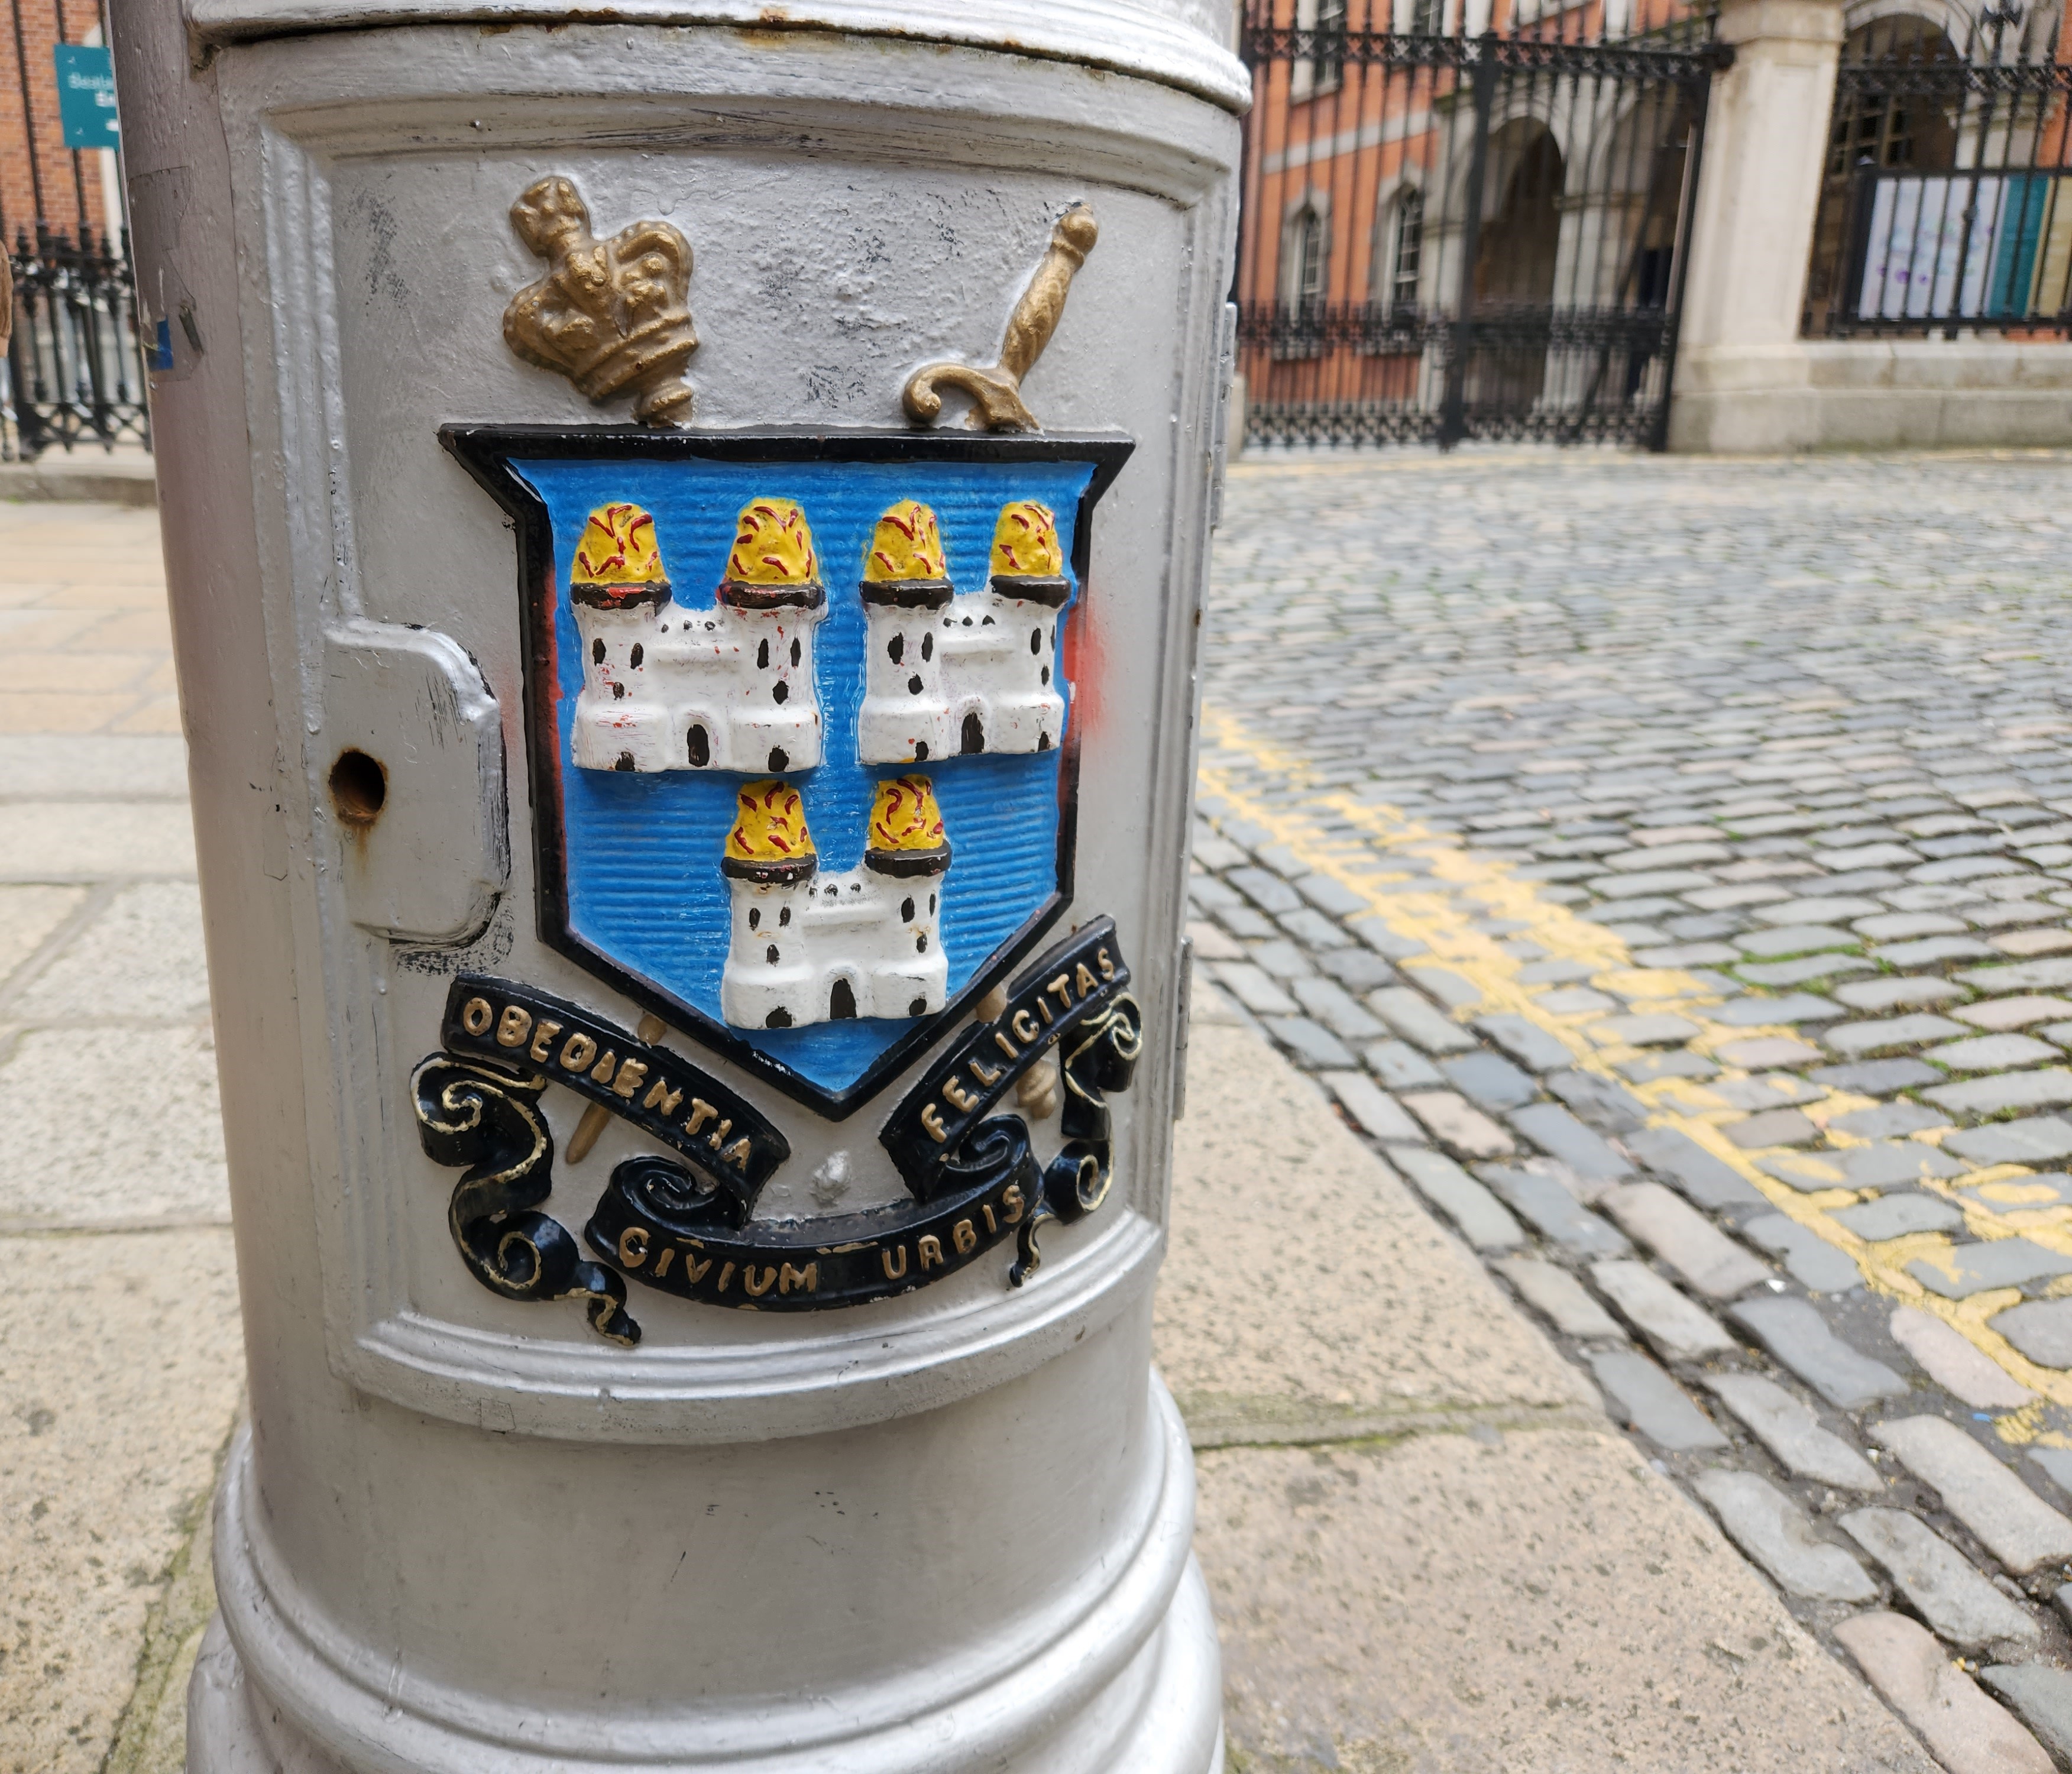 Crest of Dublin - first stop on walking tour